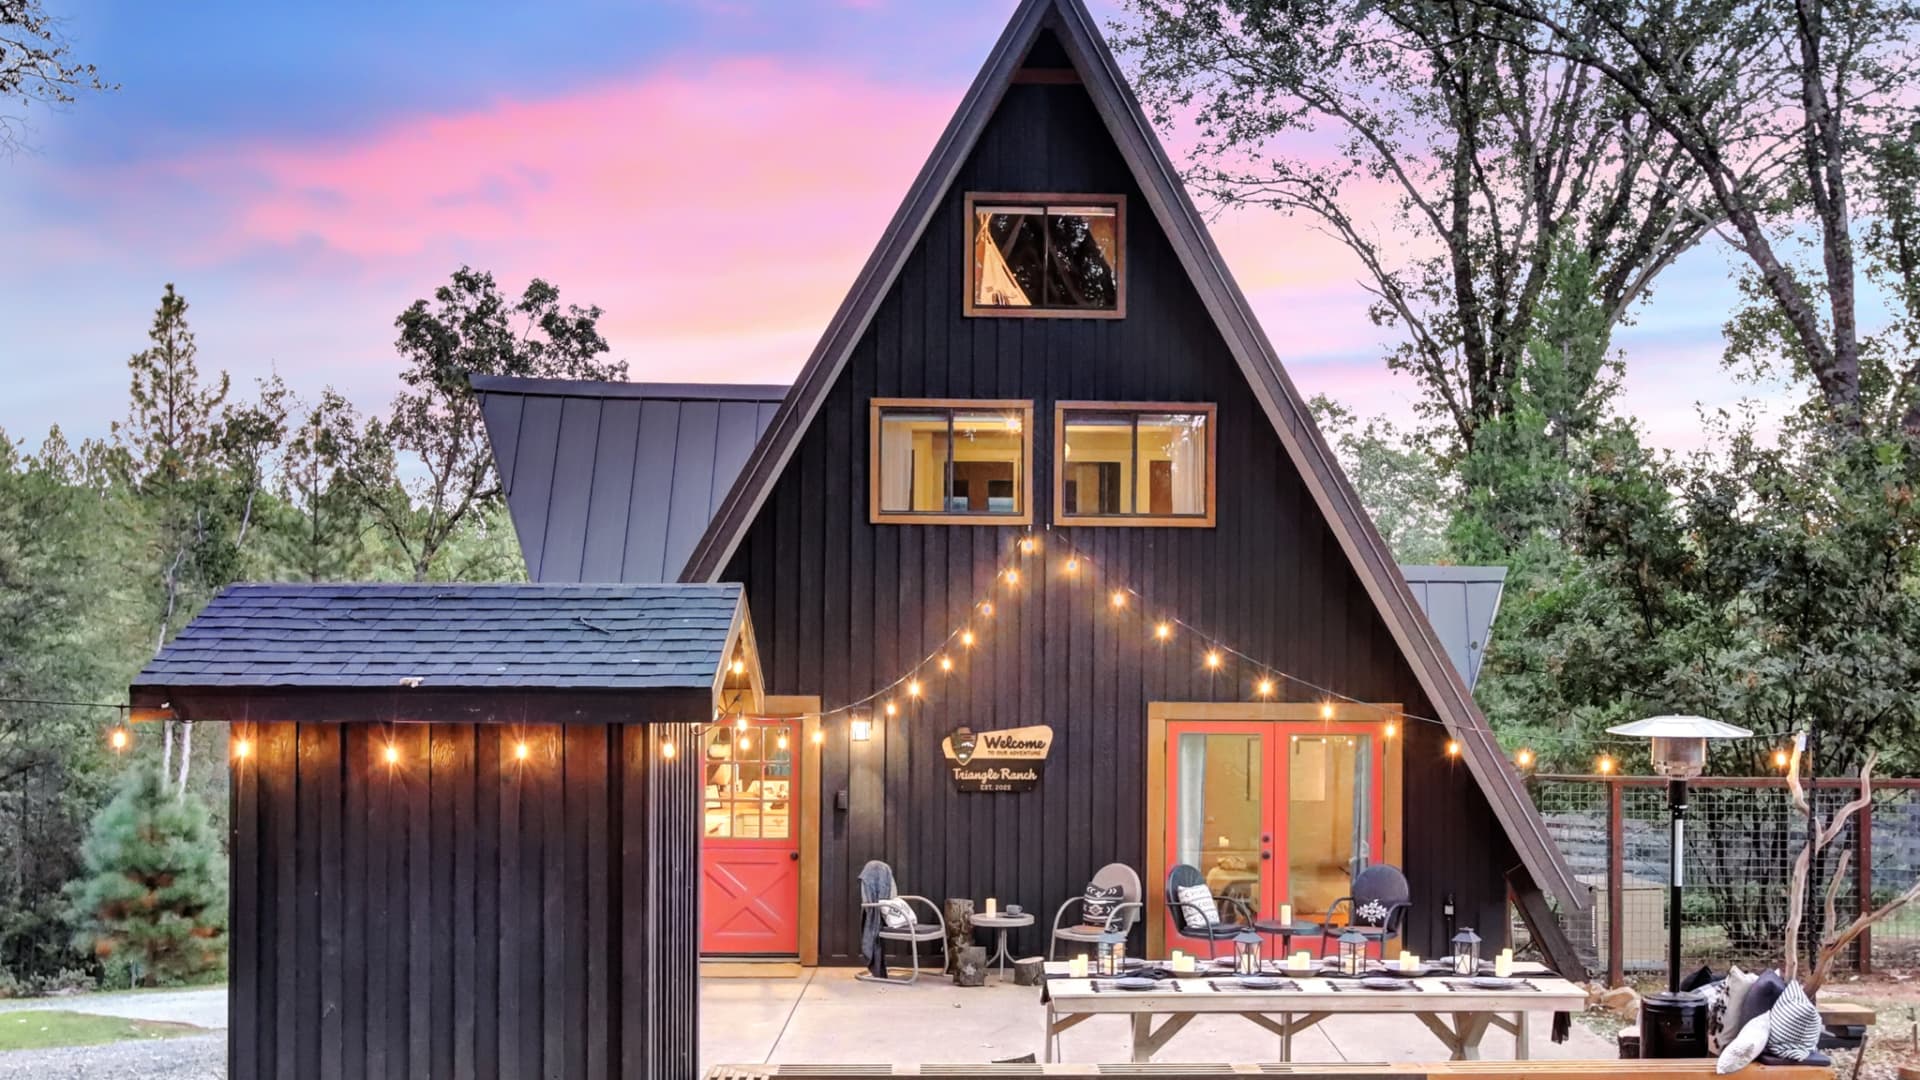 Tucked in the foothills of the quaint historic mining town of Grass Valley, CA, this A-frame home features 5 bedrooms and 2.5 bathrooms.